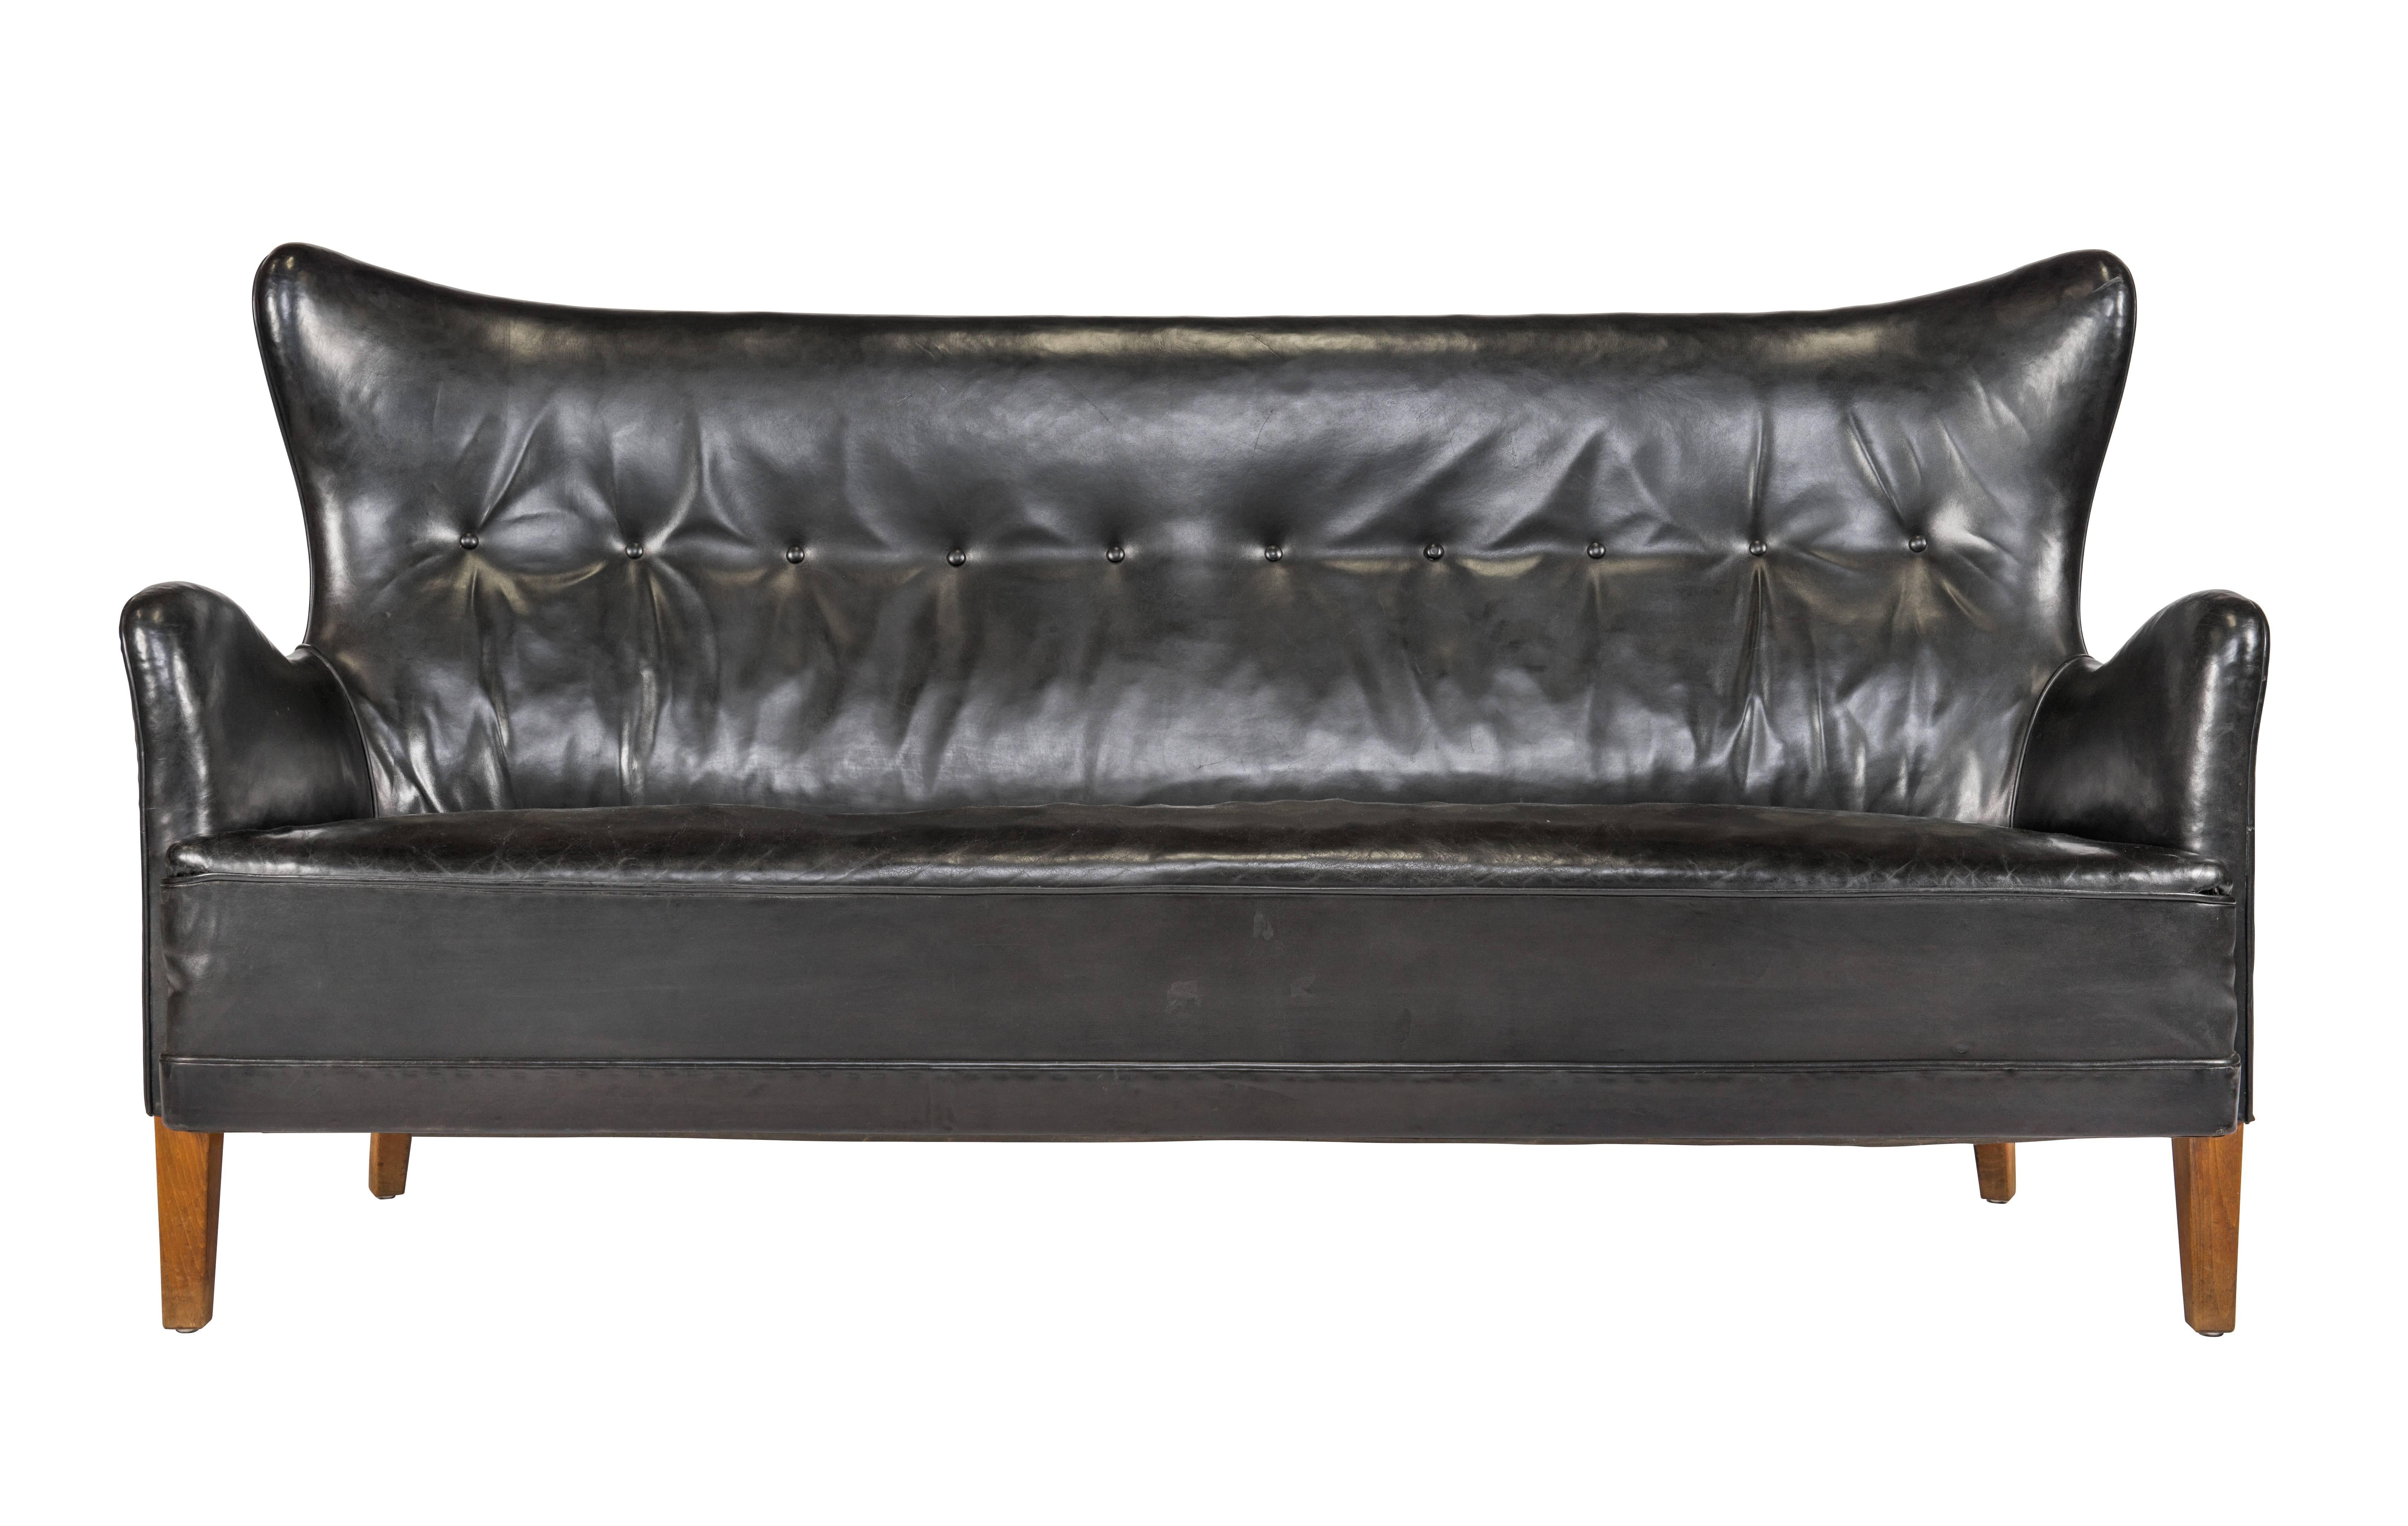 Extremely rare Frits Henningsen sofa in original black Niger leather. Designed 1935, made by cabinetmaker Frits Henningsen. Unusual example of biomorphic Scandinavian design.